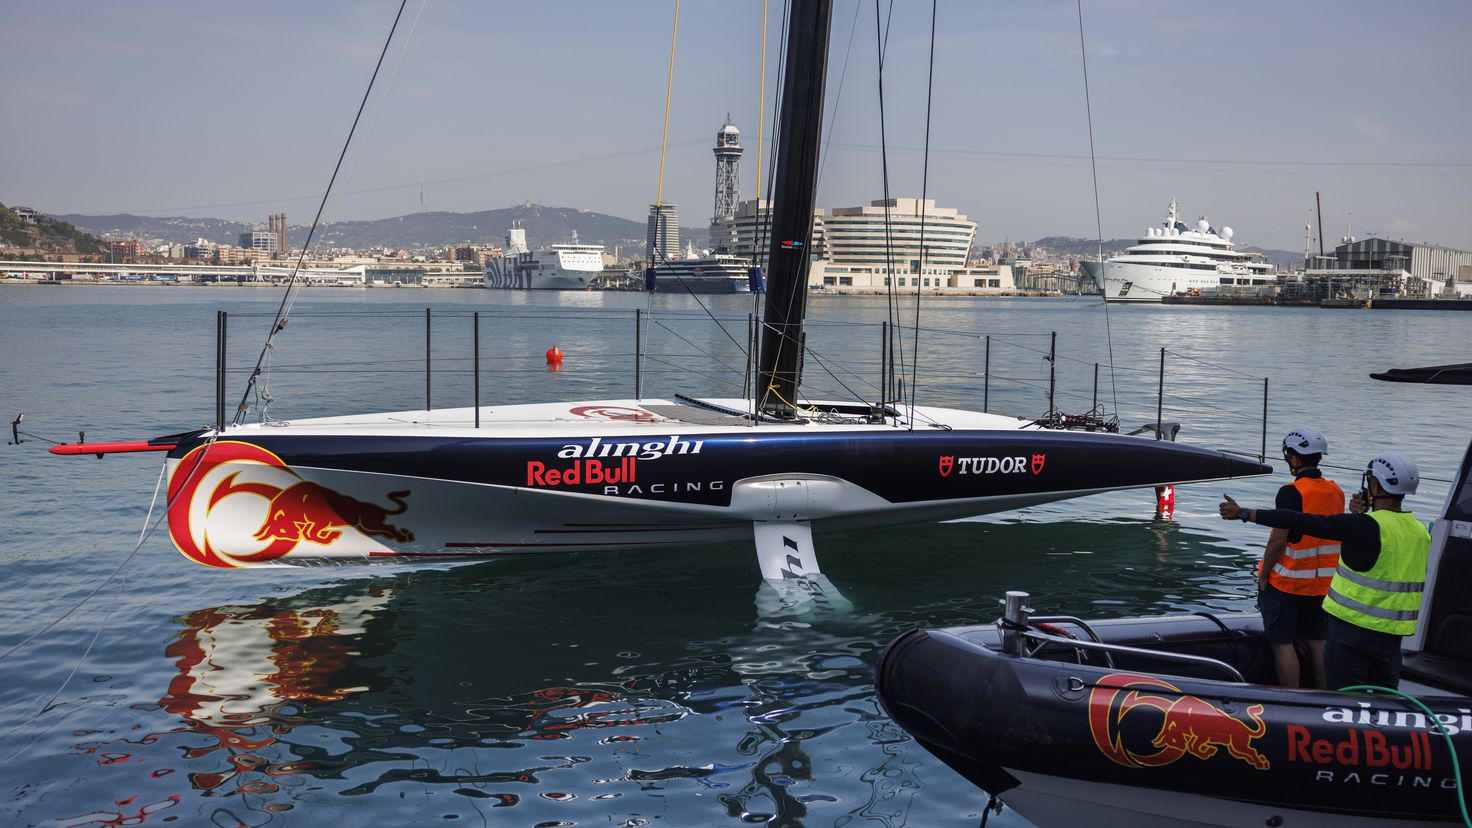 Alinghi Red Bull Racing launches its second AC40
